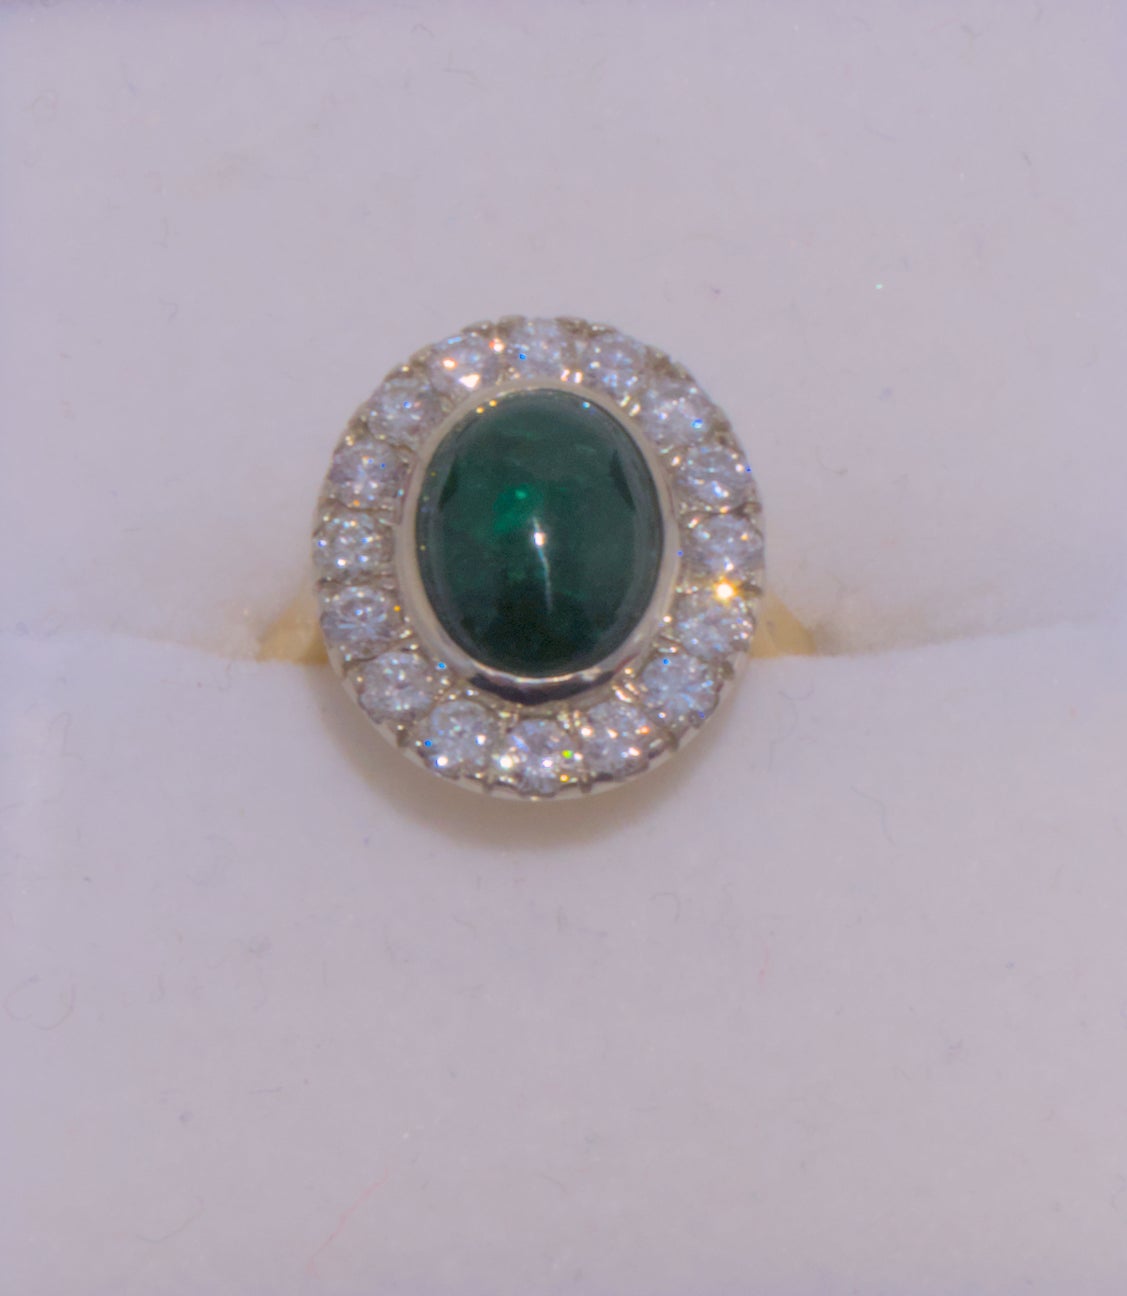 14K Yellow and White Gold 3.39 Carat Cabochon Emerald and Diamond Ring